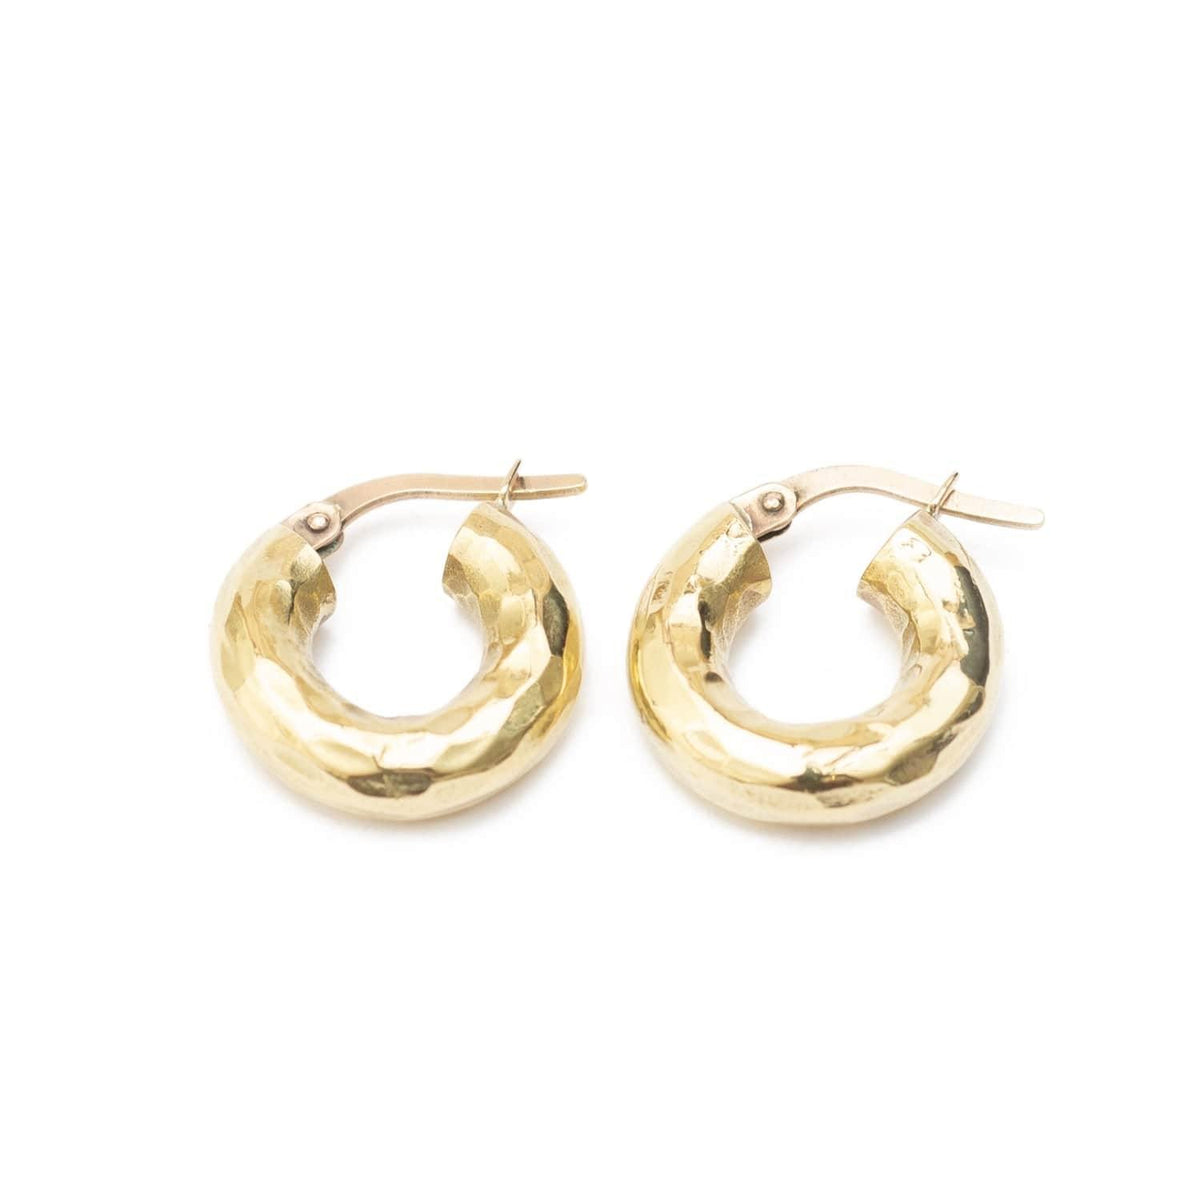 Chunky gold plated small hoop earrings with a 9ct gold latch handmade from brass for everyday wear